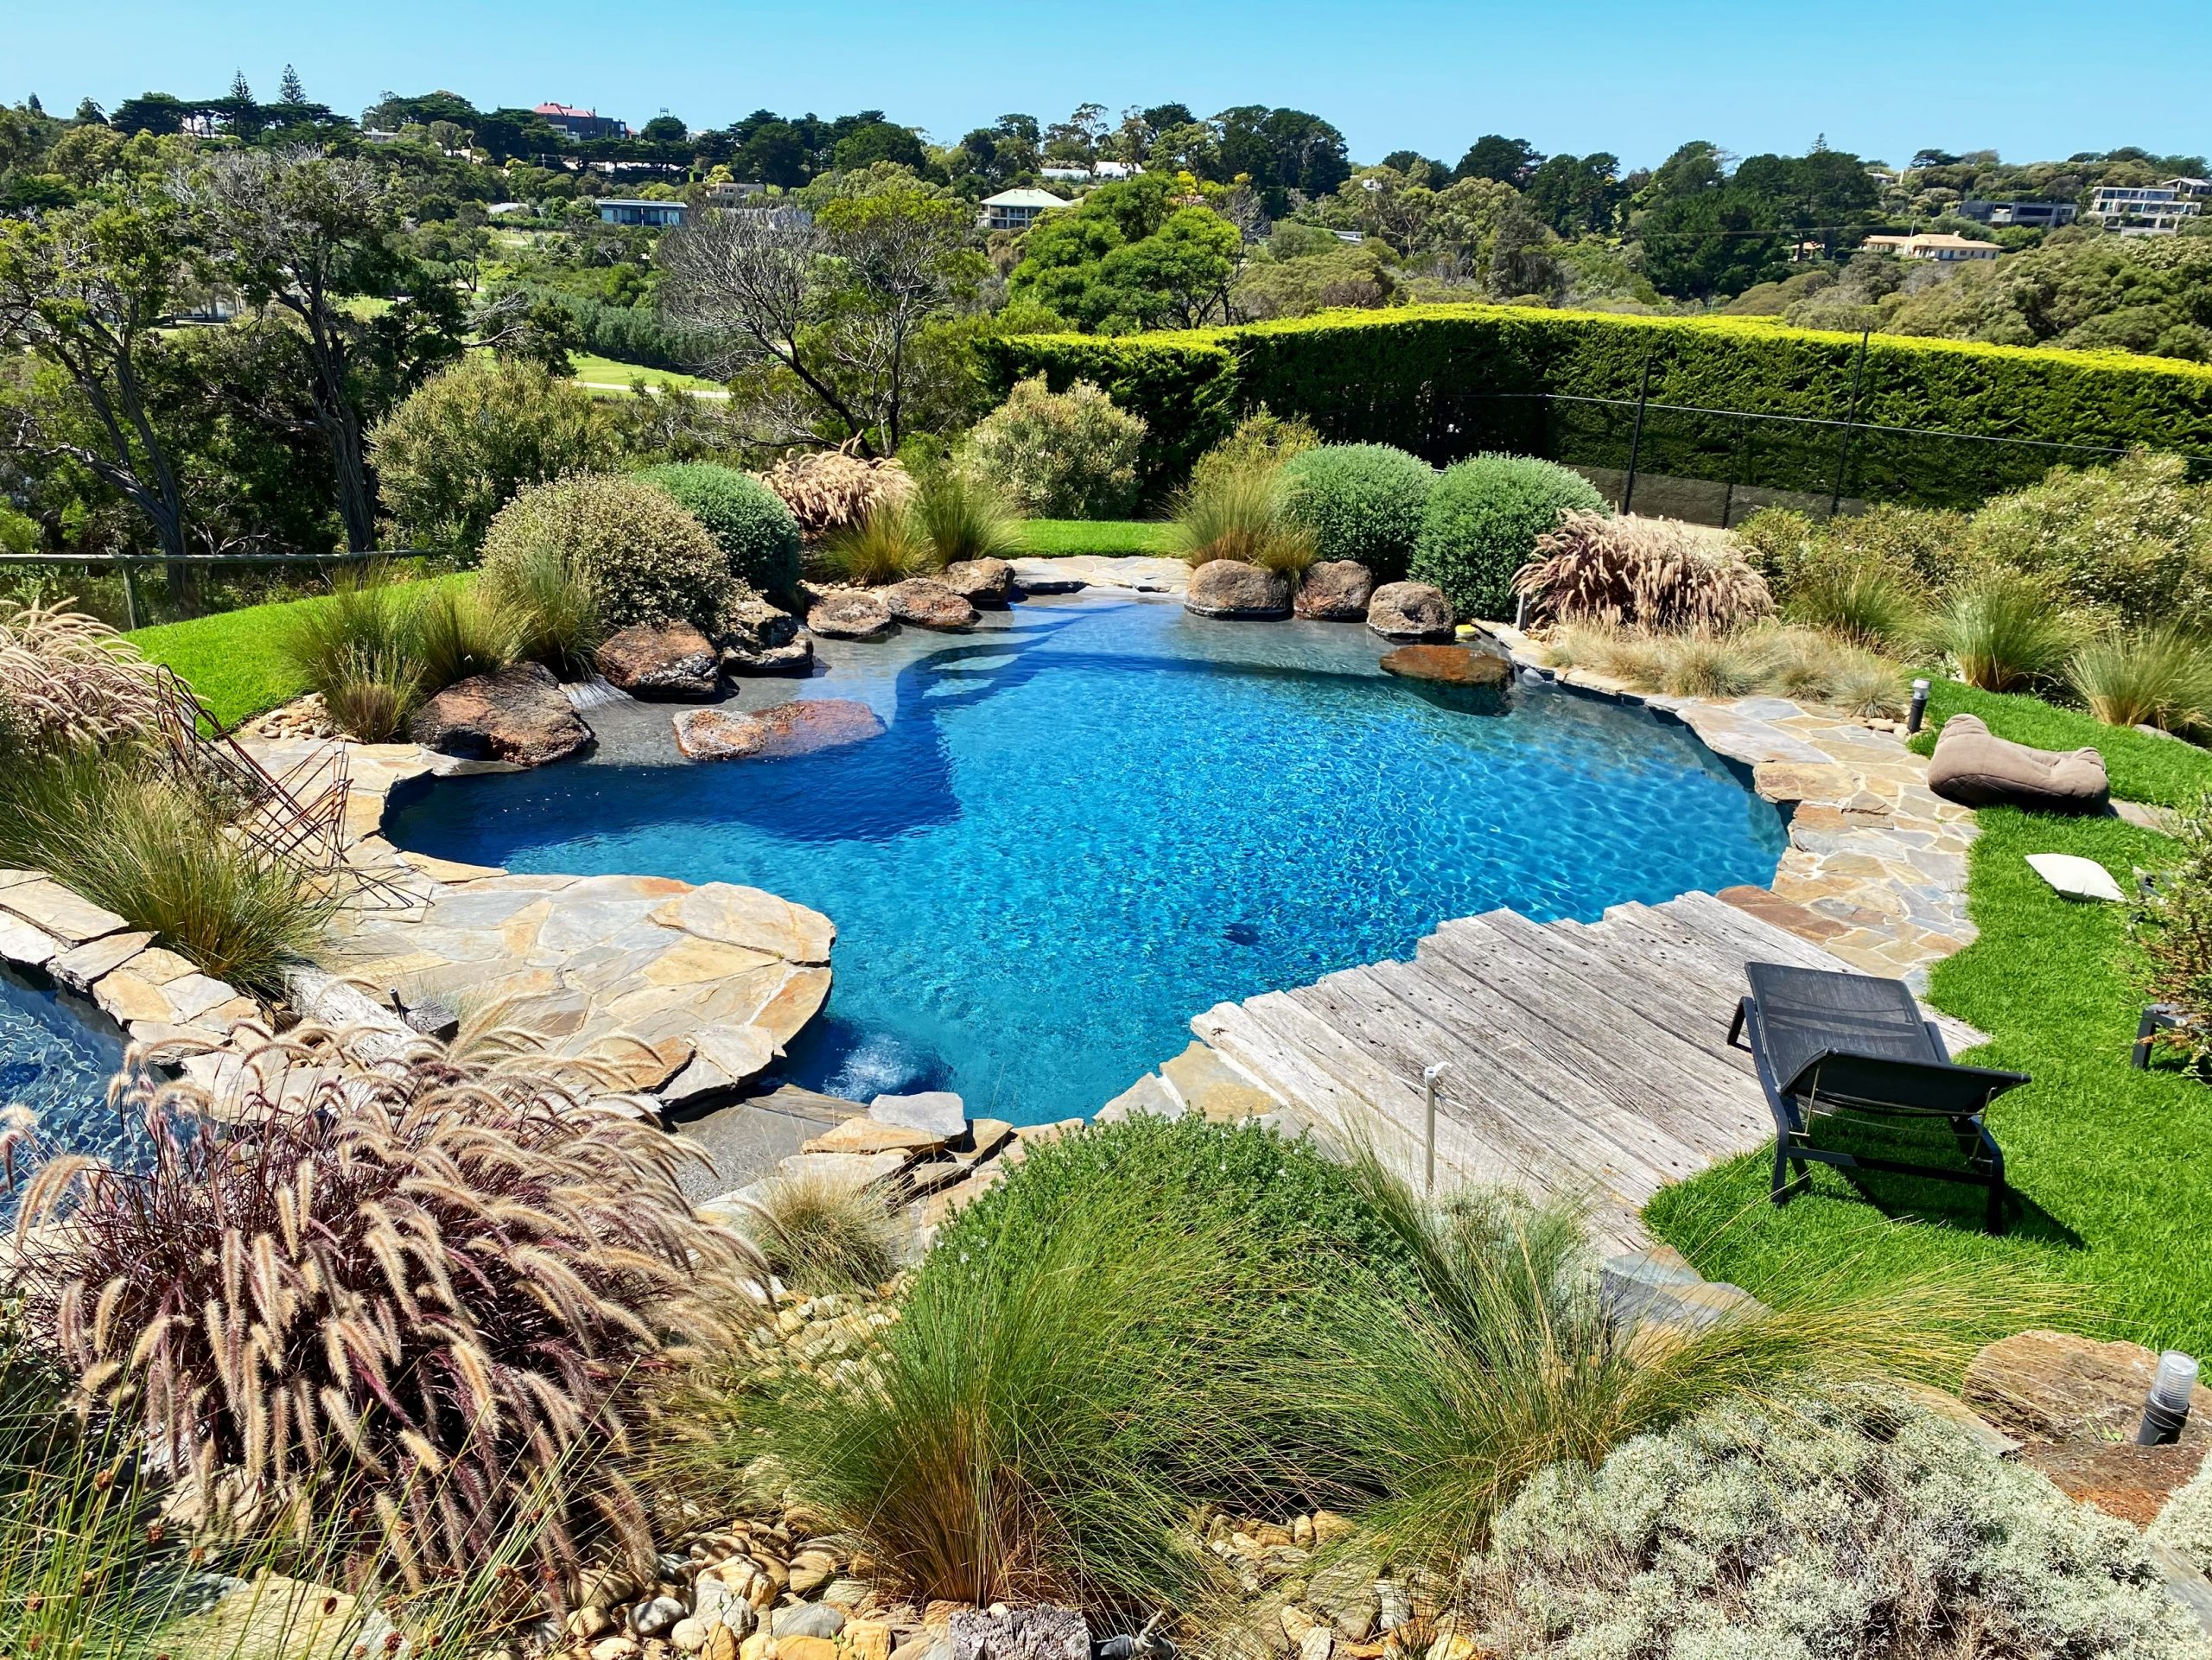 Gorgeous curved pool surrounded by stone paving and a wonderful garden — a true backyard oasis